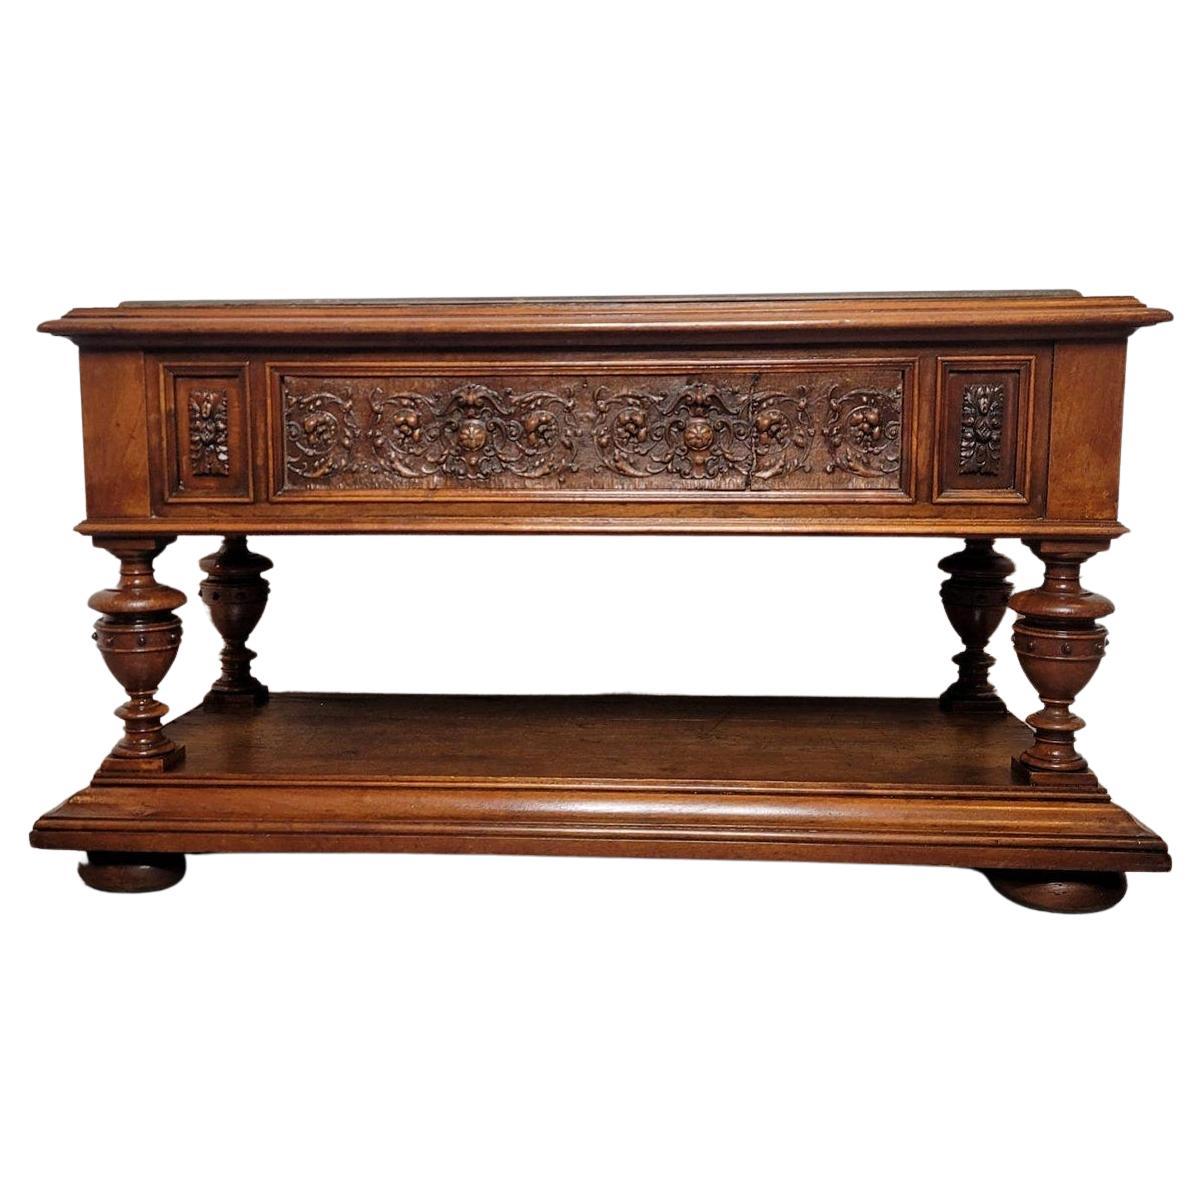 19th Century Italian Renaissance Revival Carved Jardiniere Stand For Sale